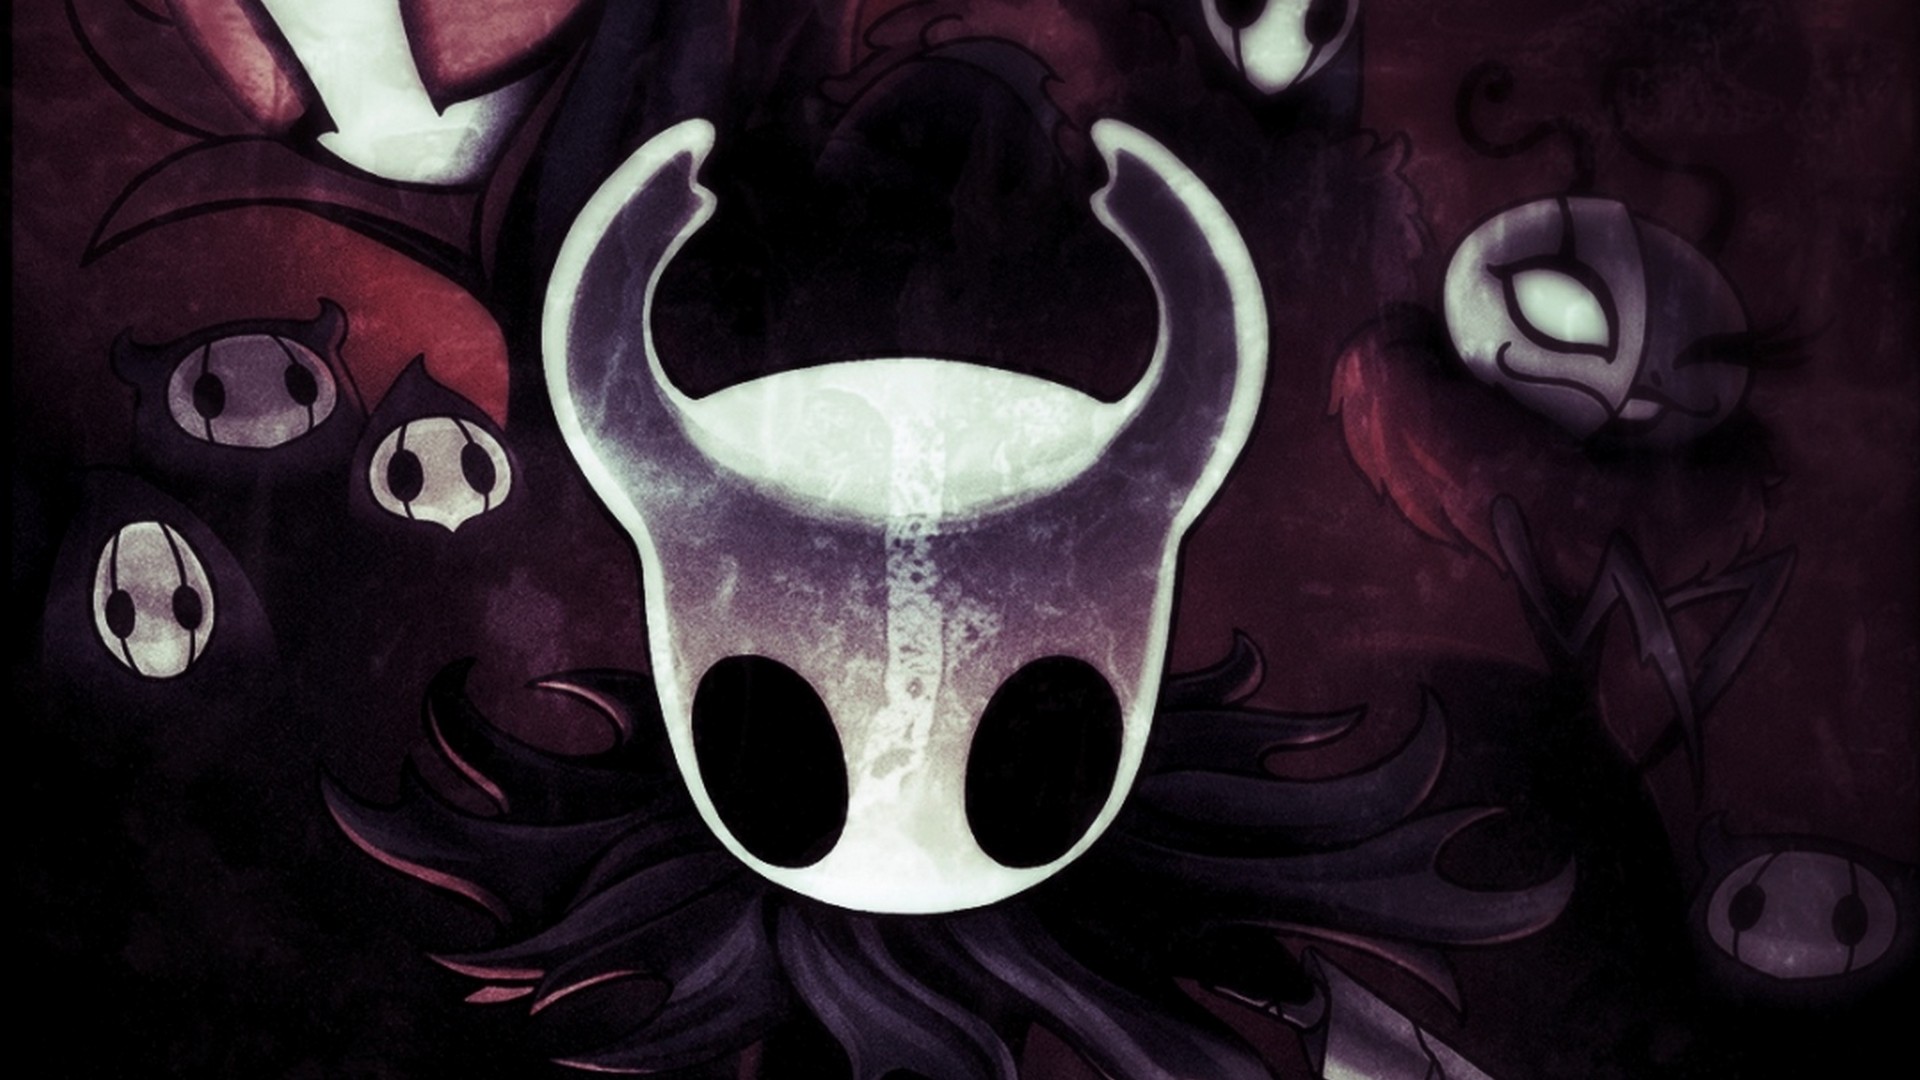 Wallpapers Computer Hollow Knight Game With high-resolution 1920X1080 pixel. You can use this wallpaper for your Windows and Mac OS computers as well as your Android and iPhone smartphones